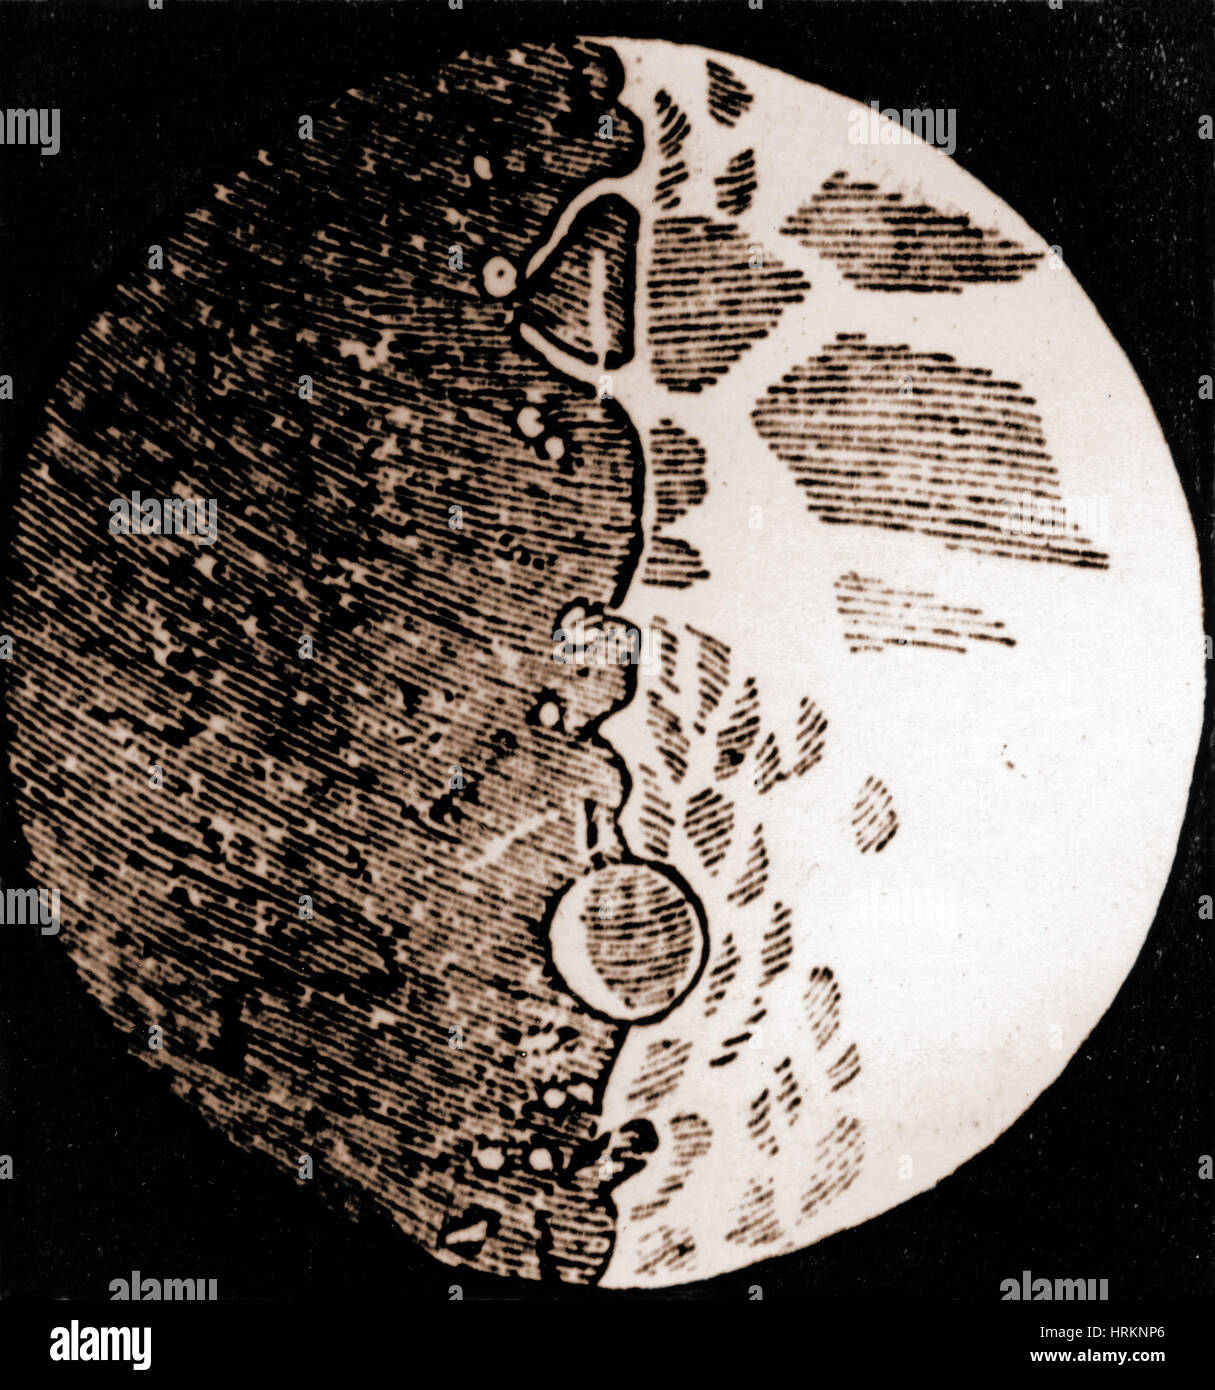 File:Galileo's sketches of the moon.png - Wikipedia